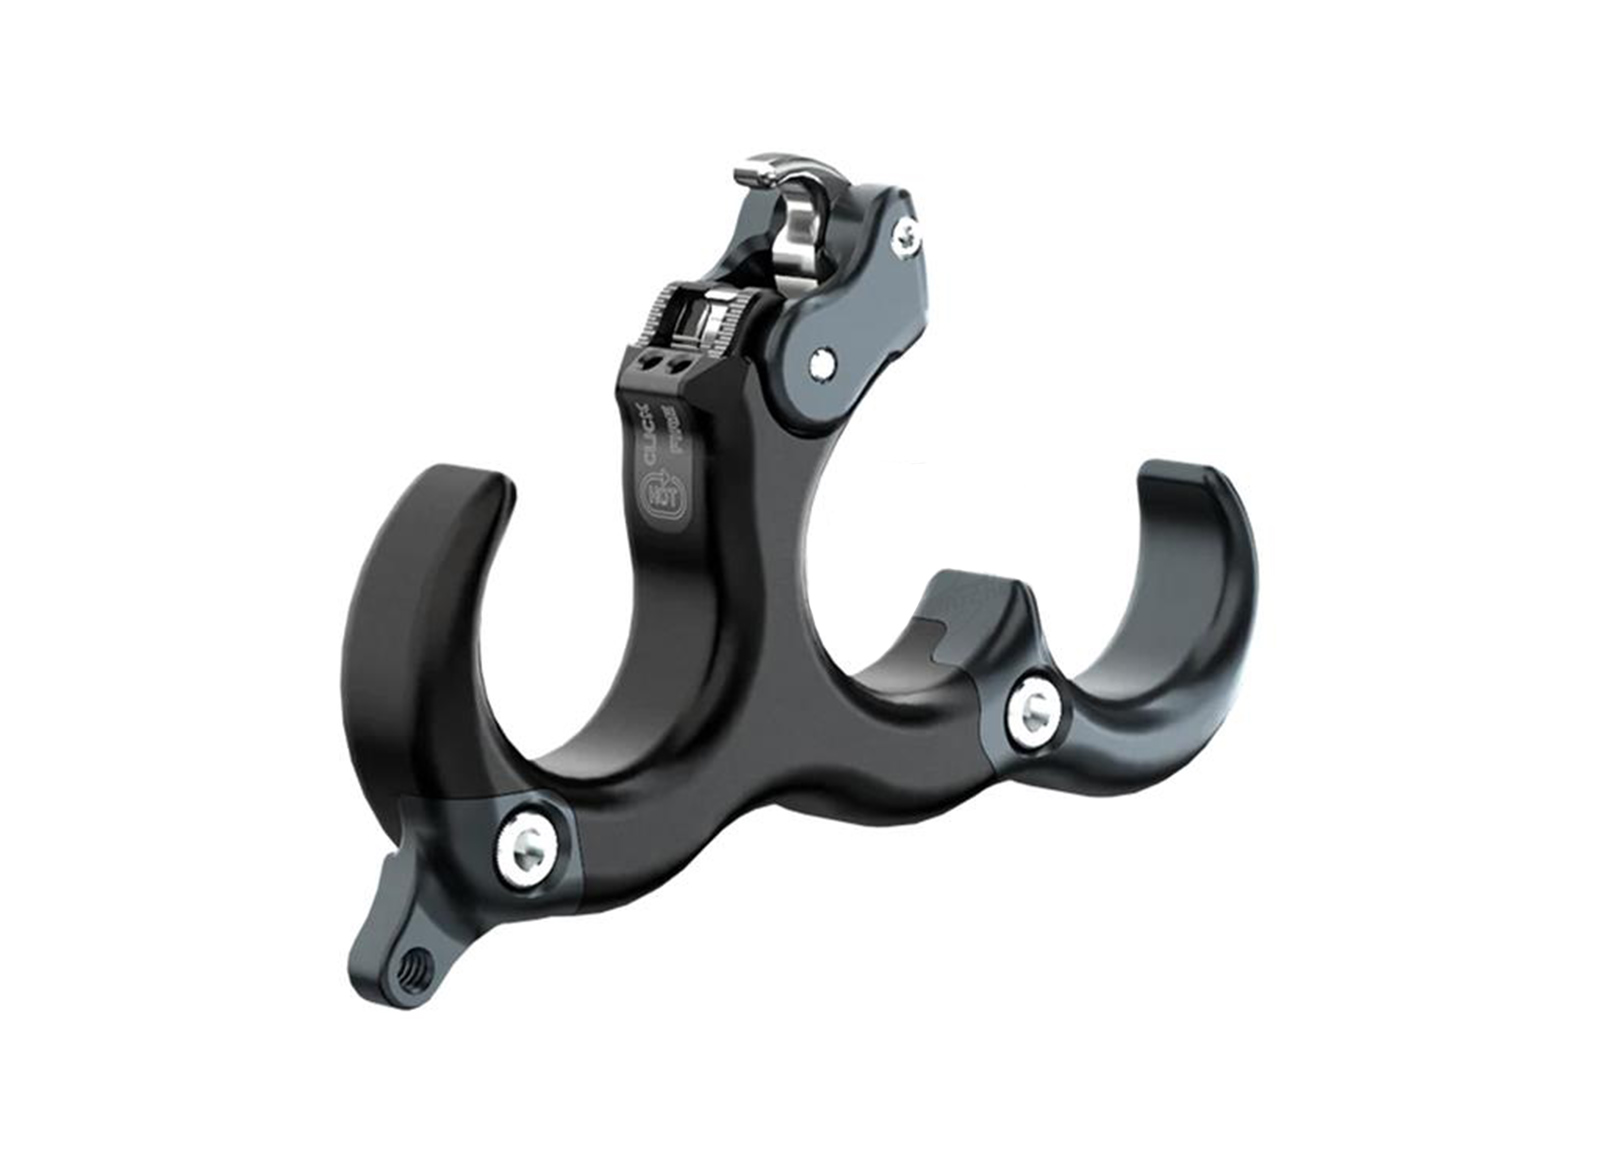 ULTRAVIEW RELEASE BACK TENSION THE HINGE 2 LARGE ANODIZED ALUMINUM